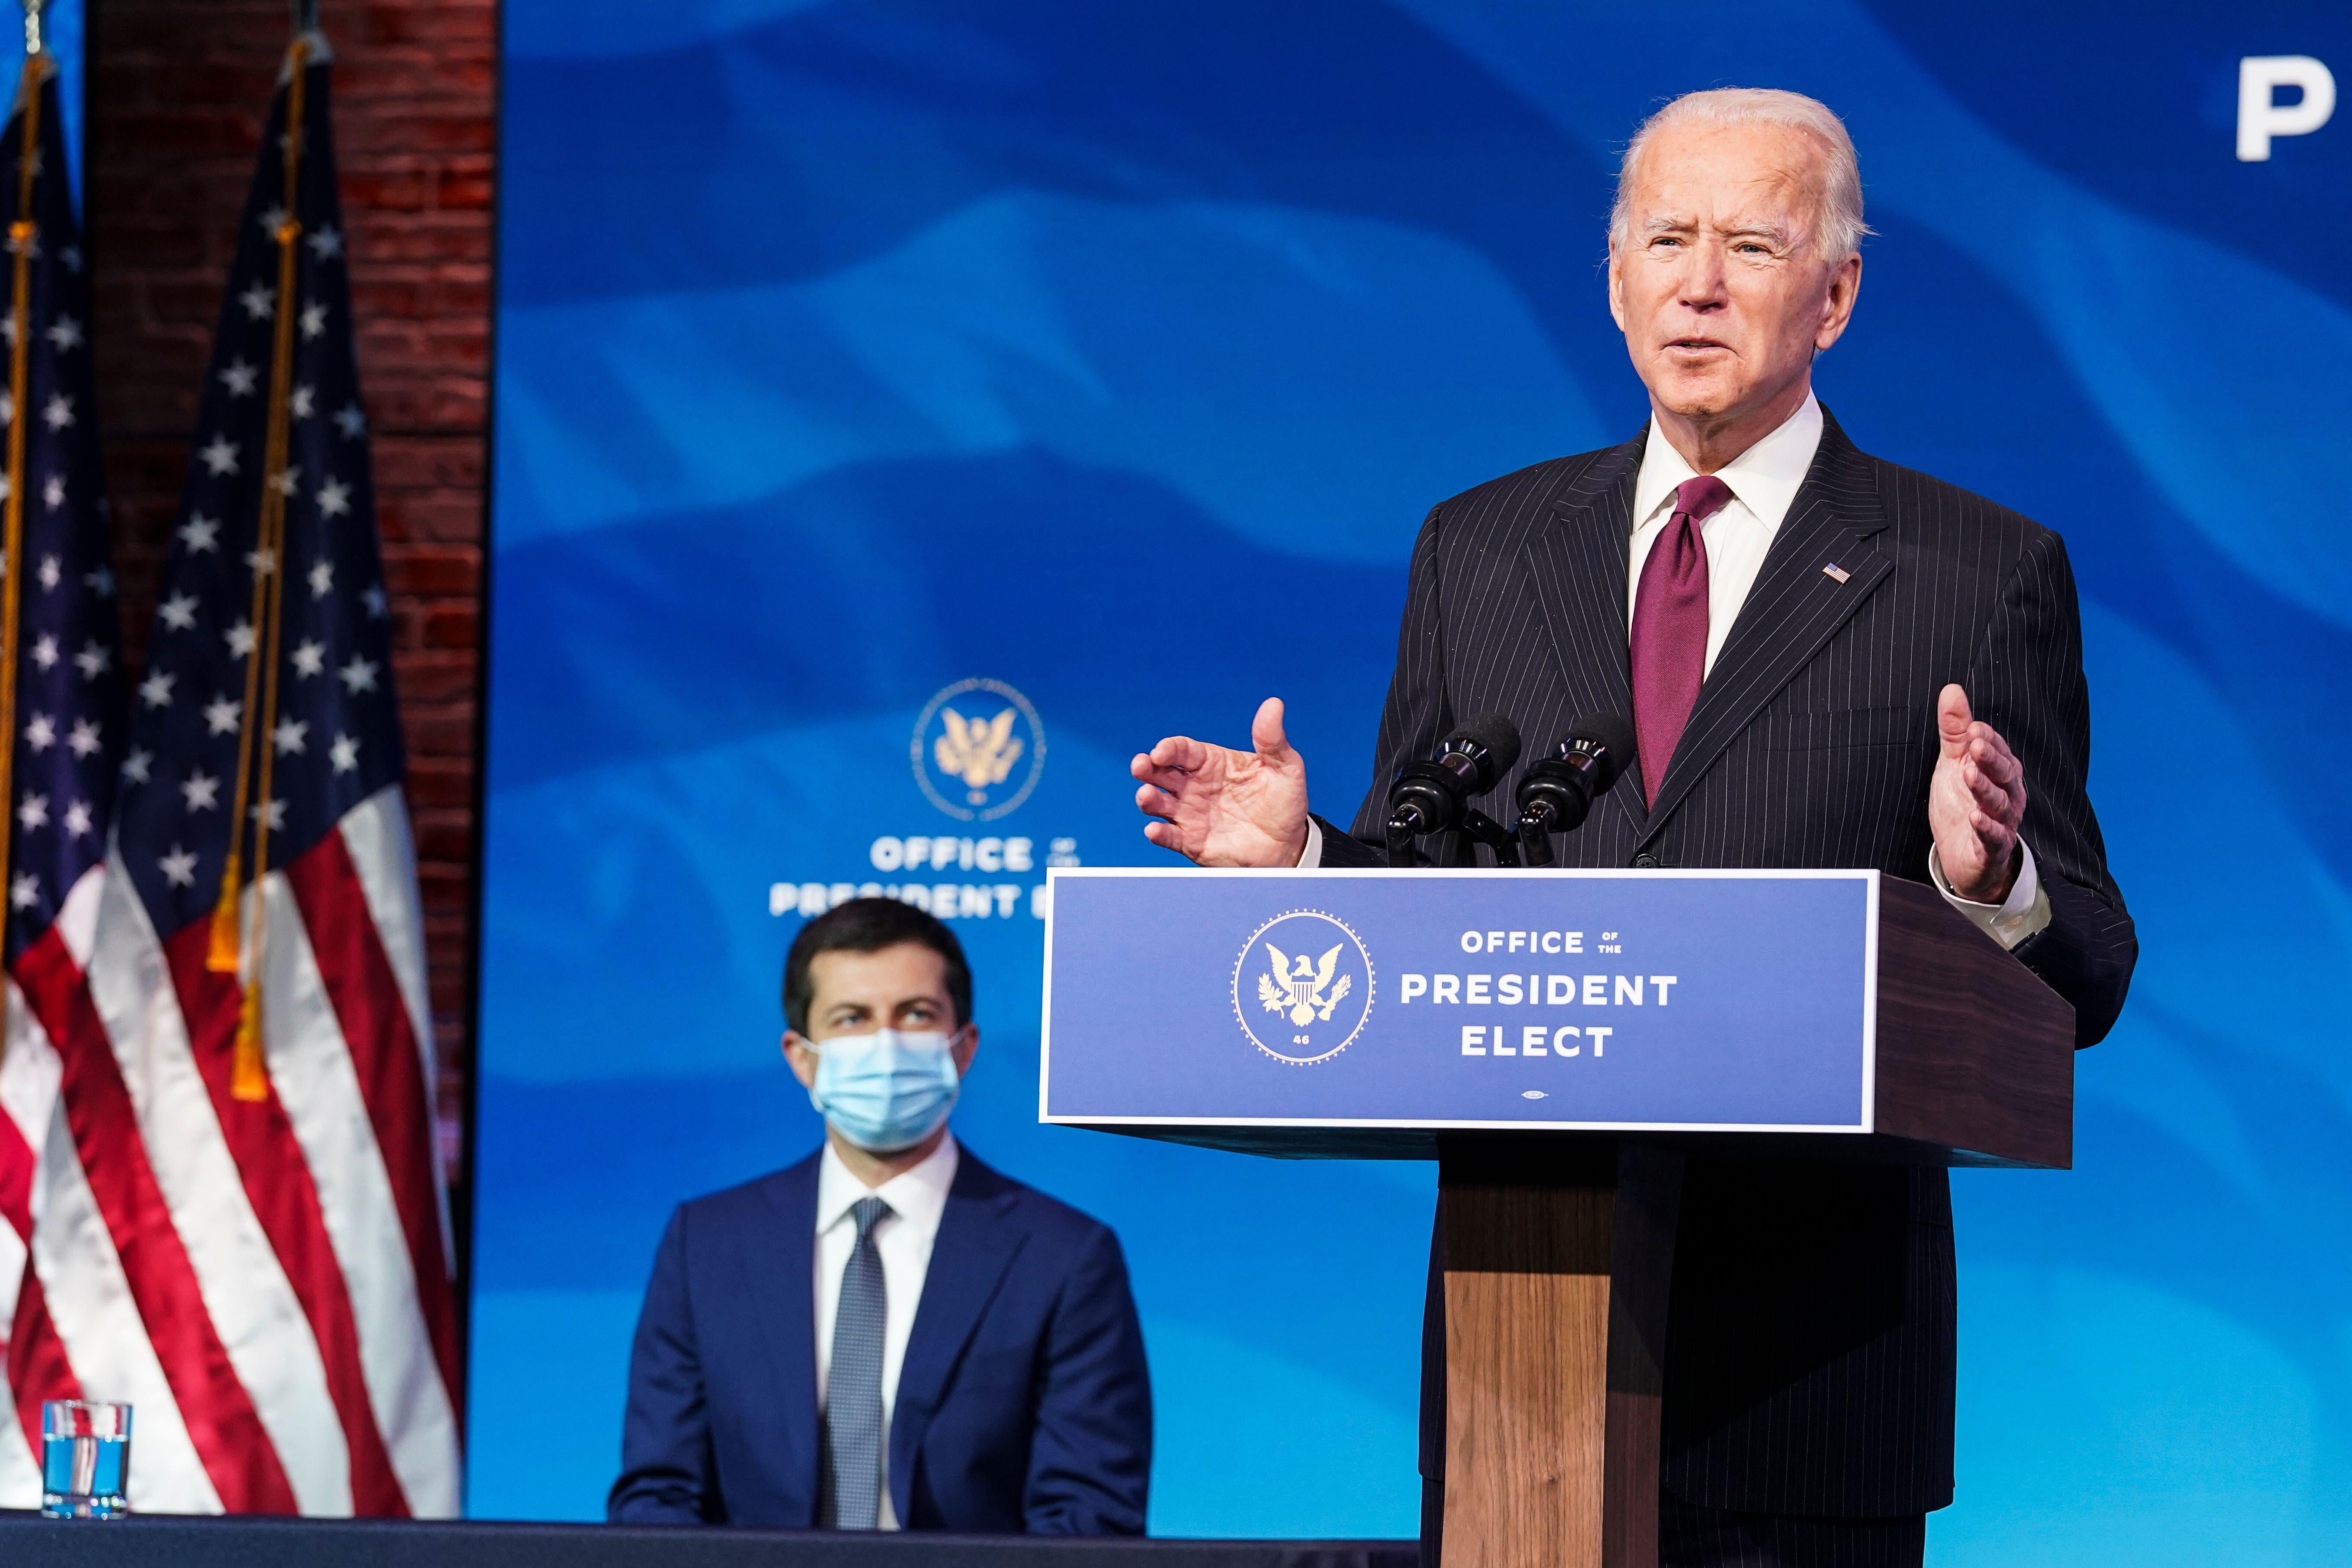 Biden speaks at a lectern while Buttigieg sits behind him, wearing a face mask.